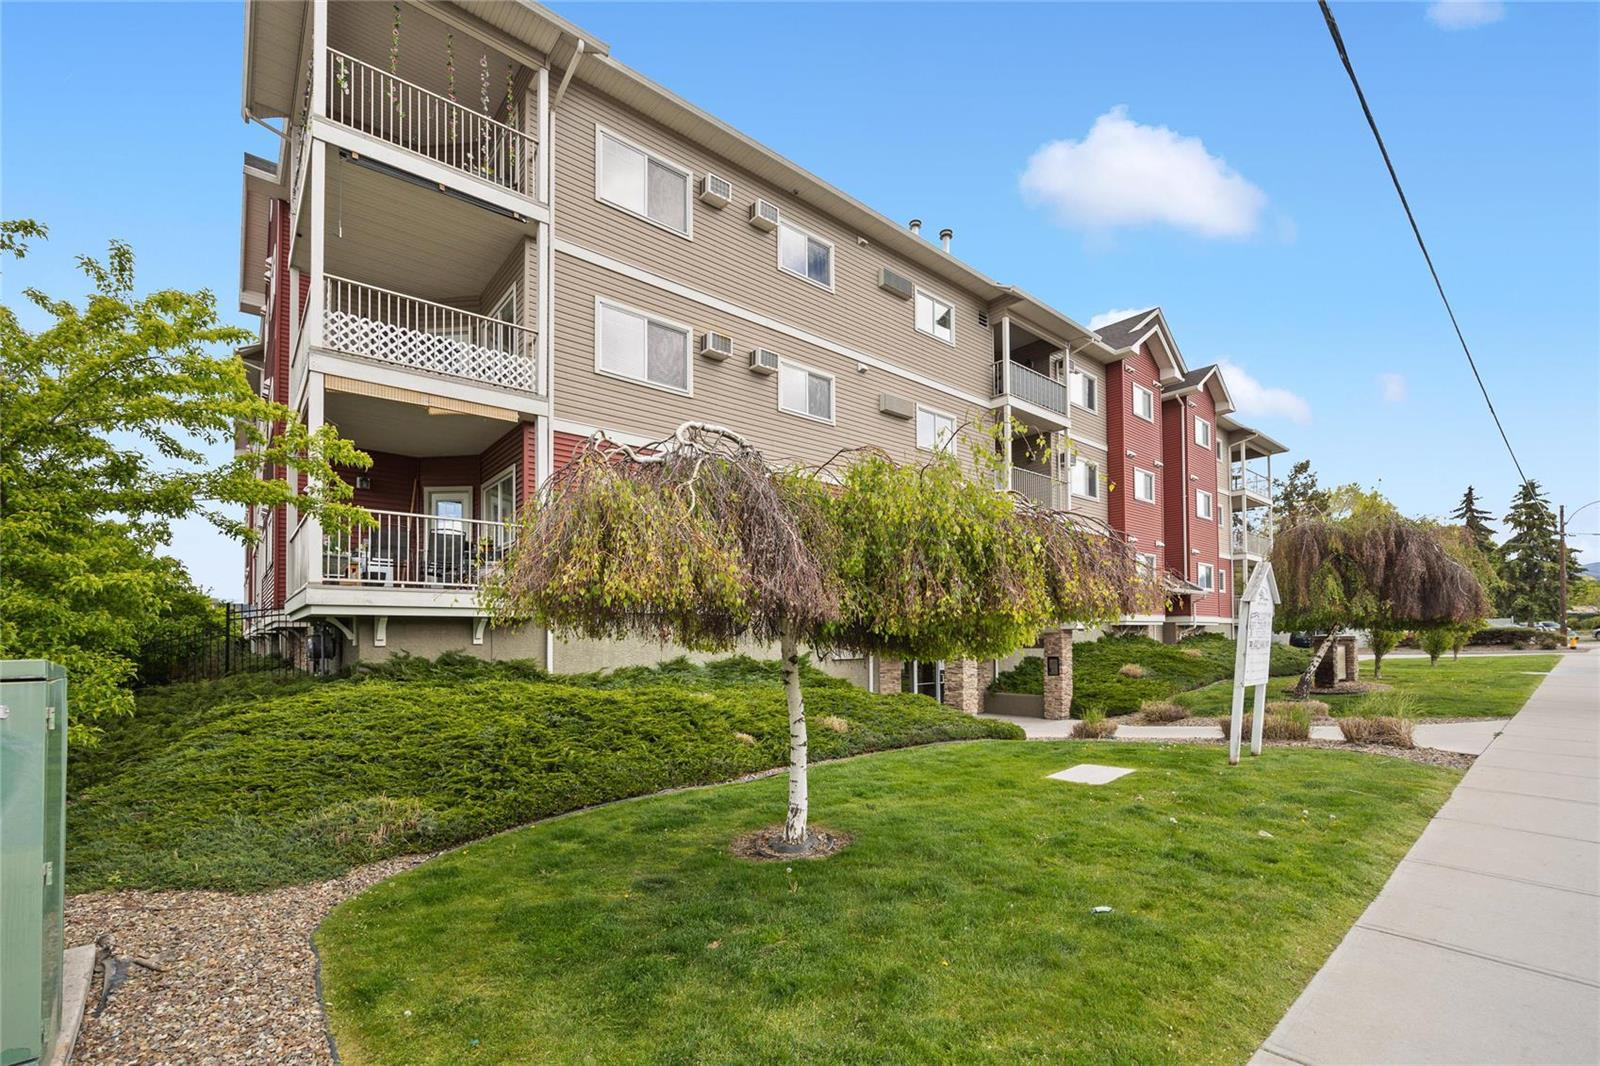 Main Photo: 201 345 MILLS ROAD in KELOWNA: Z BCNREB Out of Area Condo for sale : MLS®# 10256090